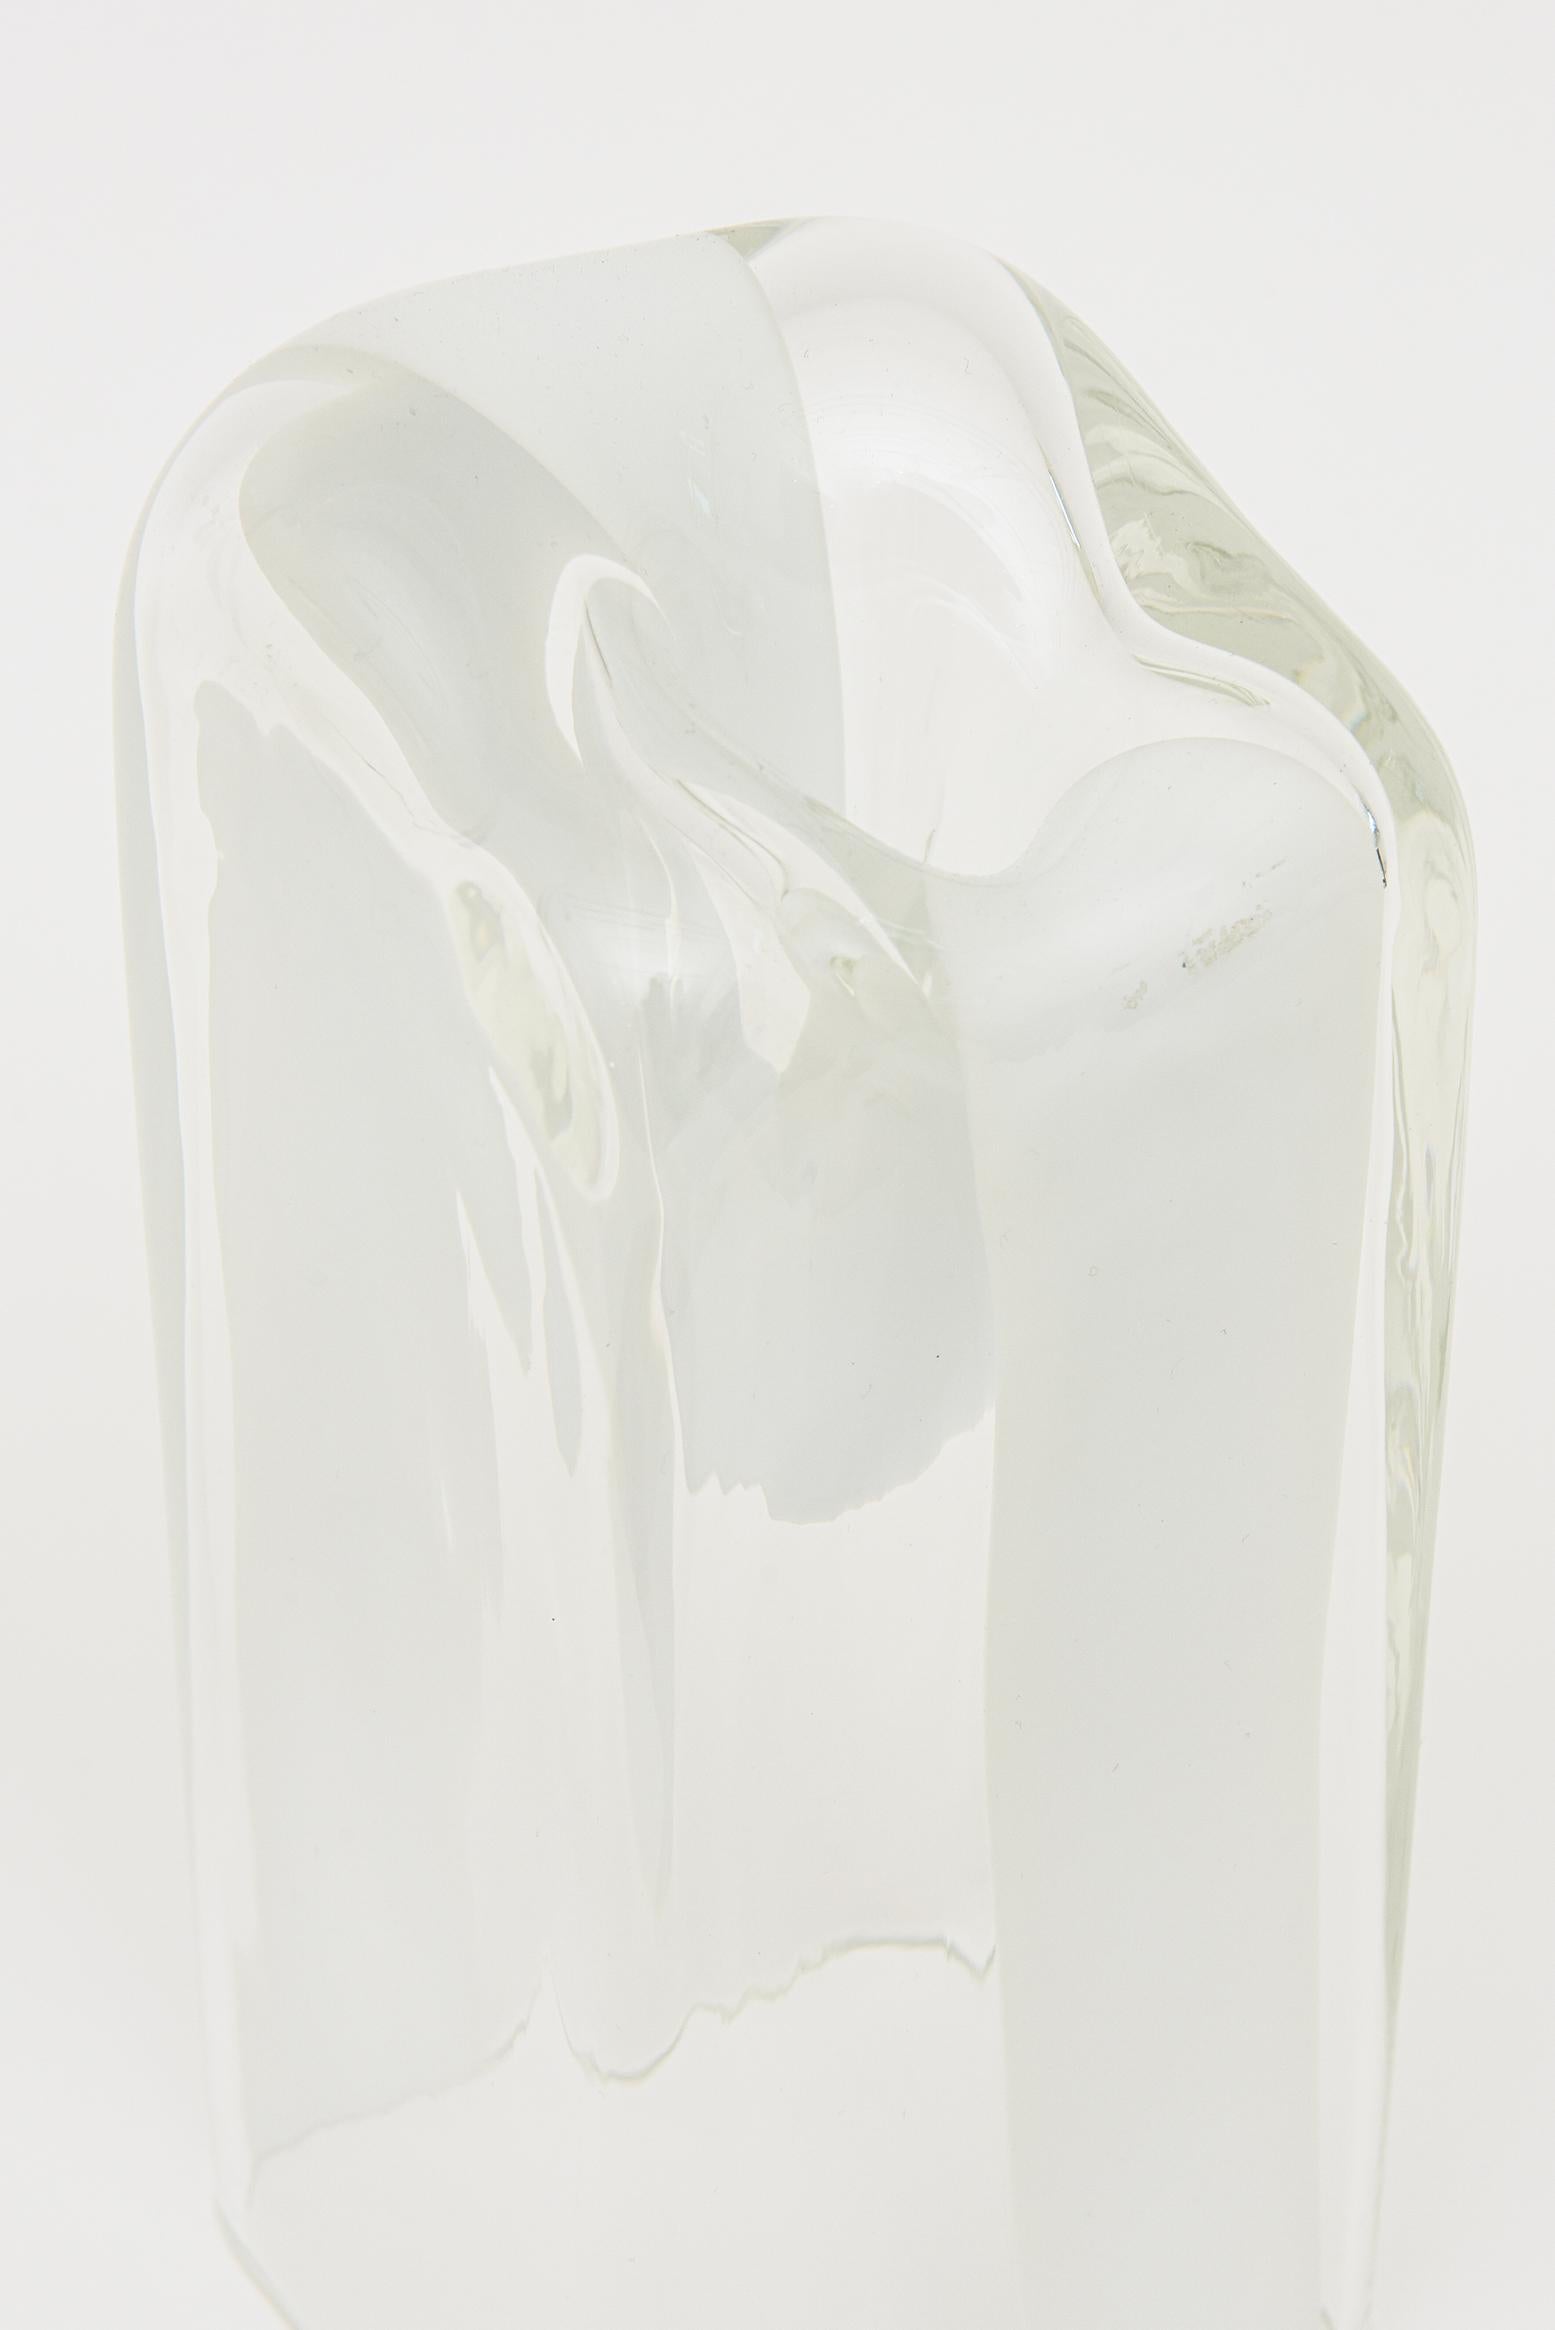 Vintage Murano Antonio da Ros for Cenedese White, Clear Blob Vases or Vessels  For Sale 2